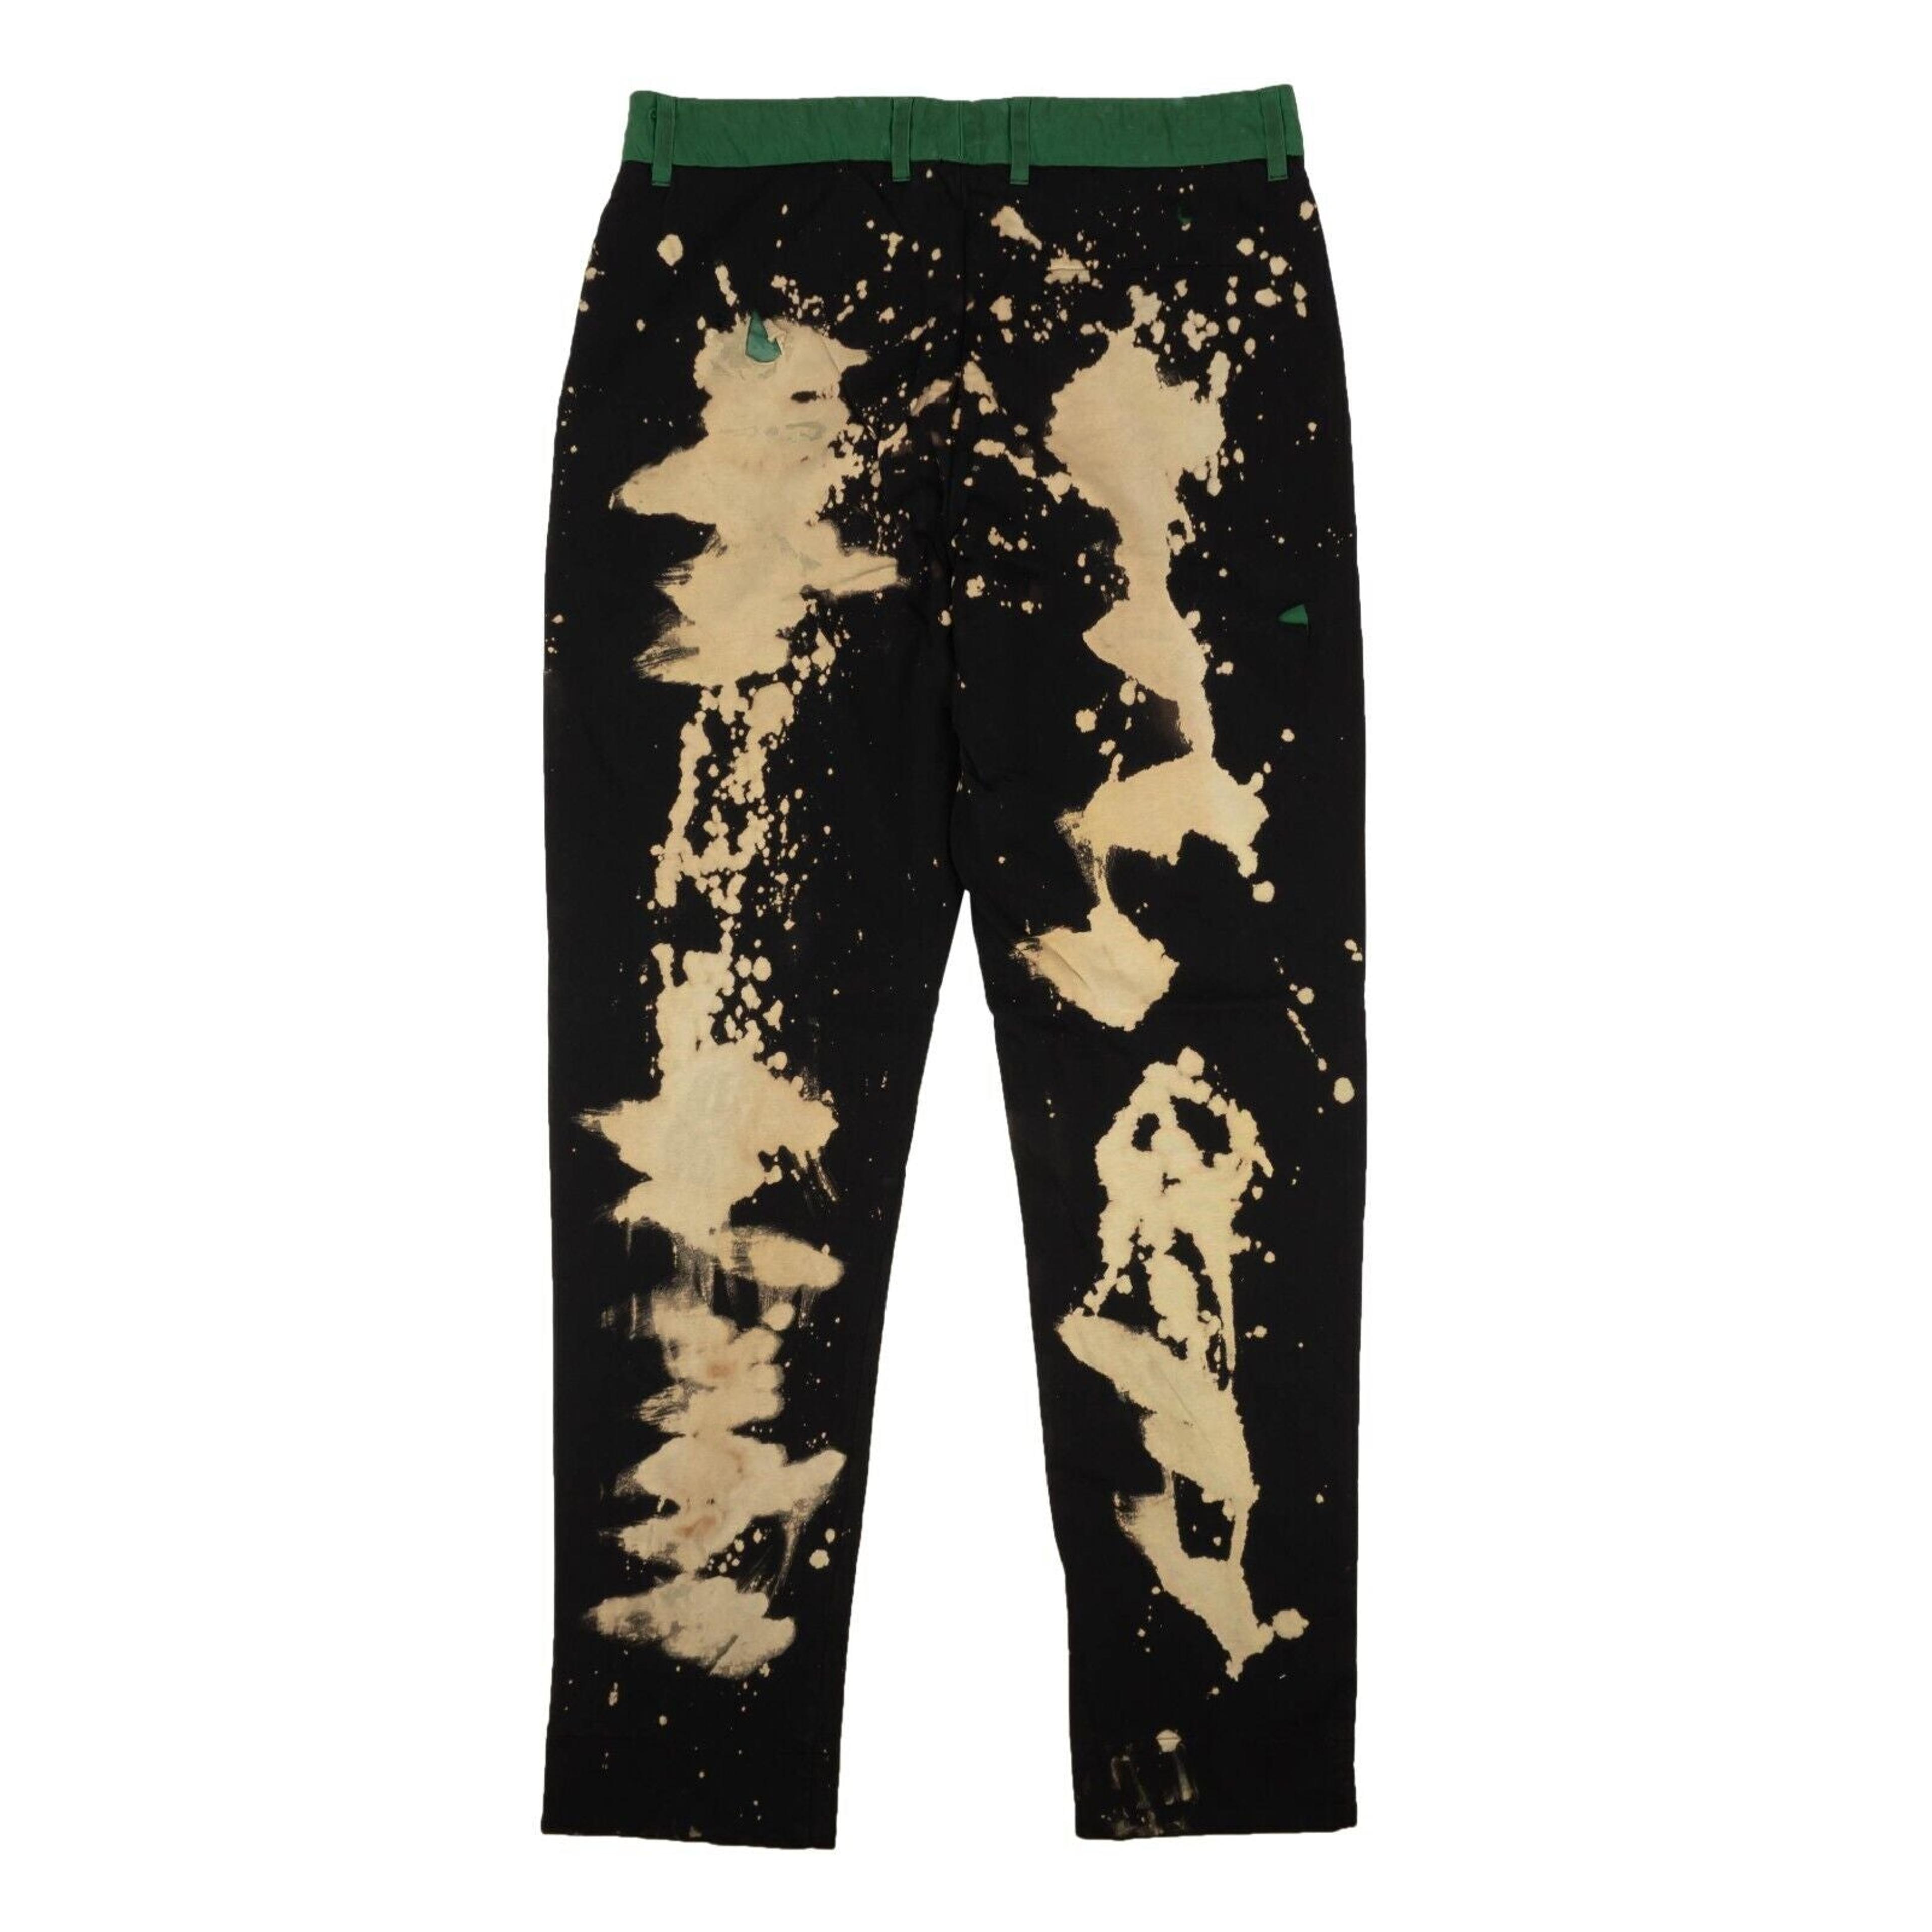 Alternate View 1 of Black And Green Distressed Bleached Pants